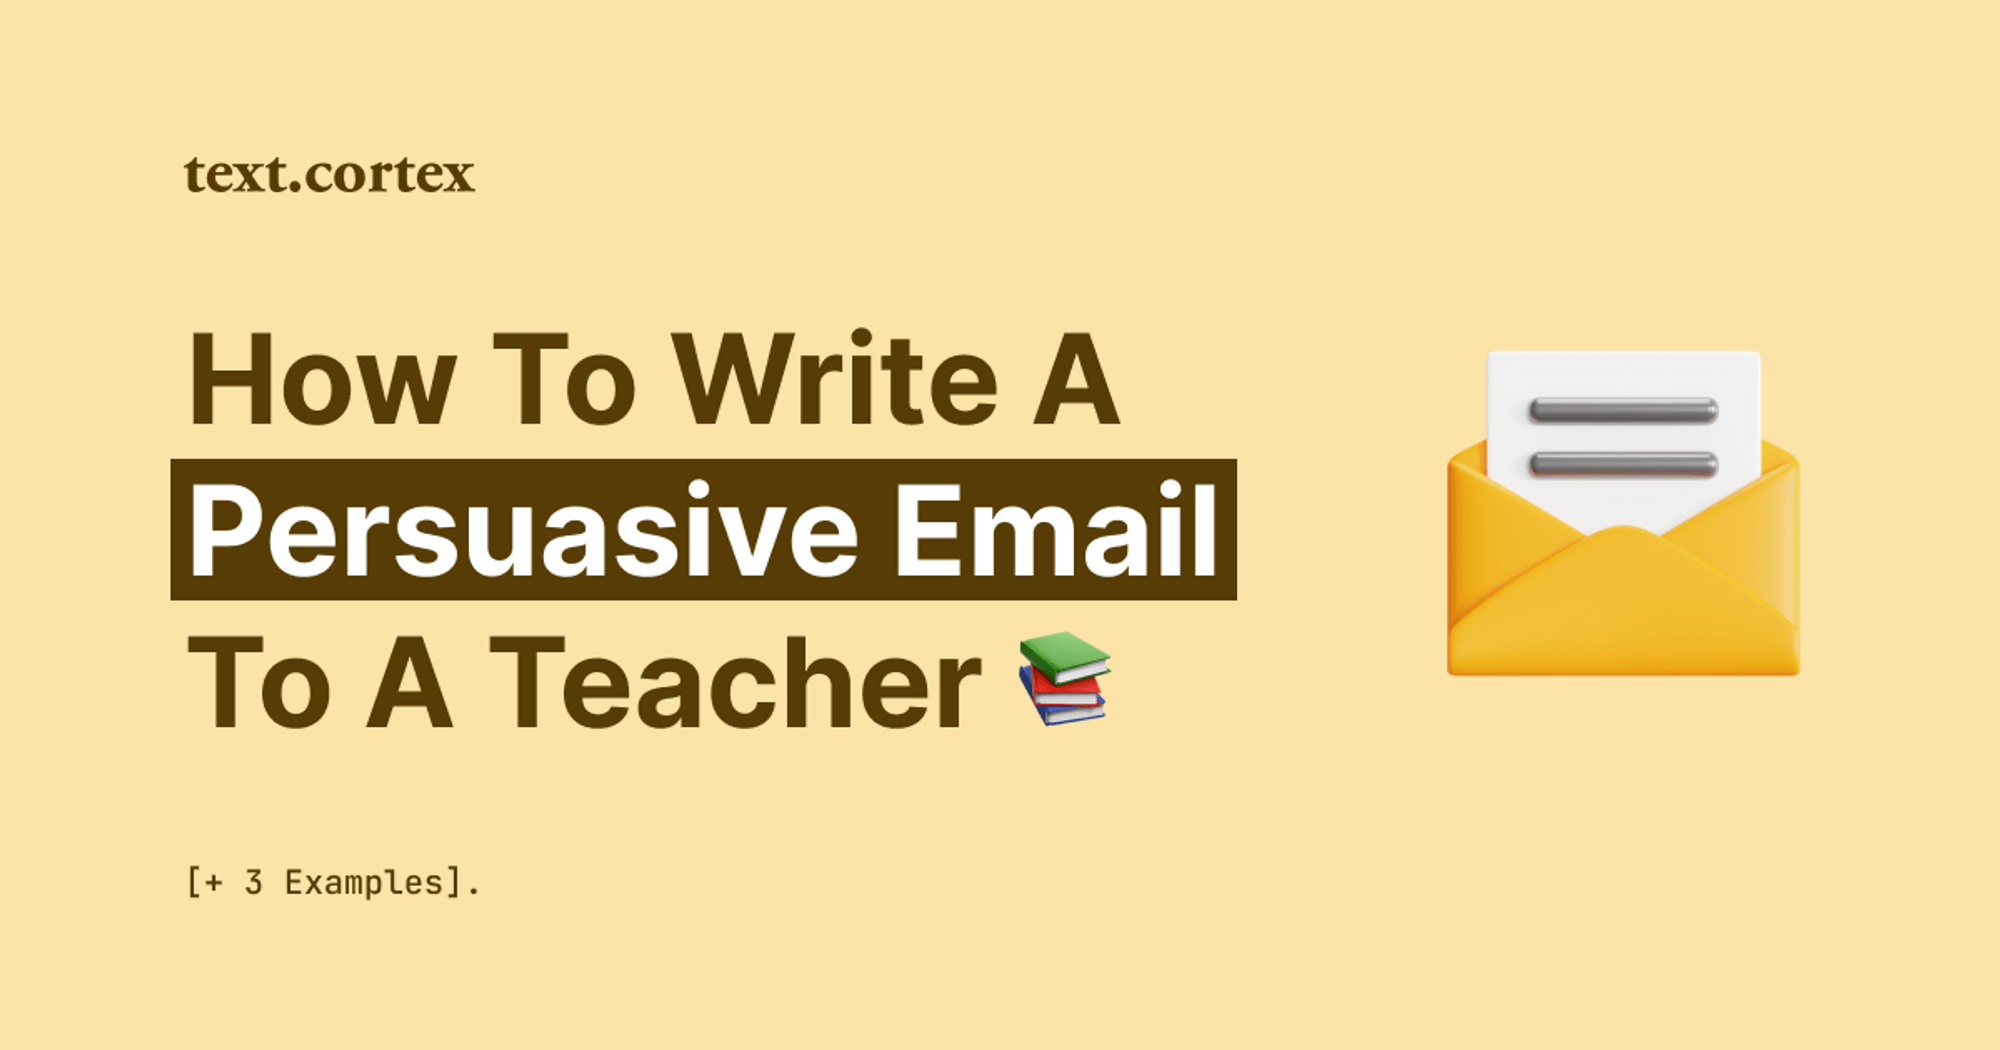 How To Write a Persuasive Email to a Teacher [+3 Examples]